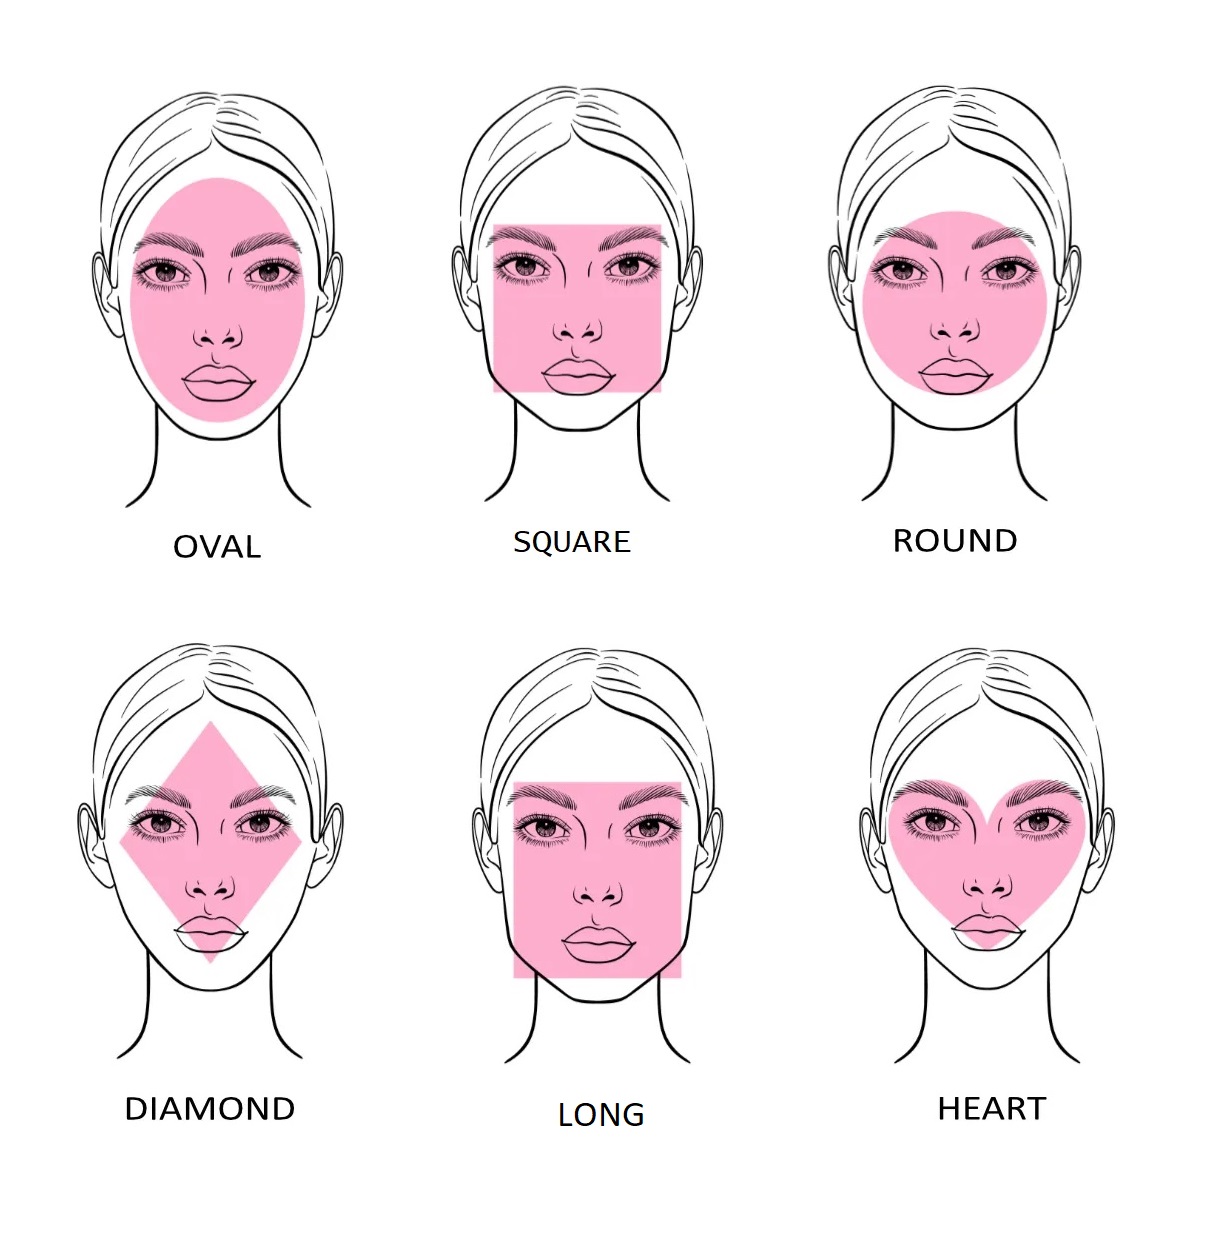 35 Flattering, Non-Basic Hairstyles for My Oval-Faced Comrades | Oval face  hairstyles, Basic hairstyles, Short hair styles